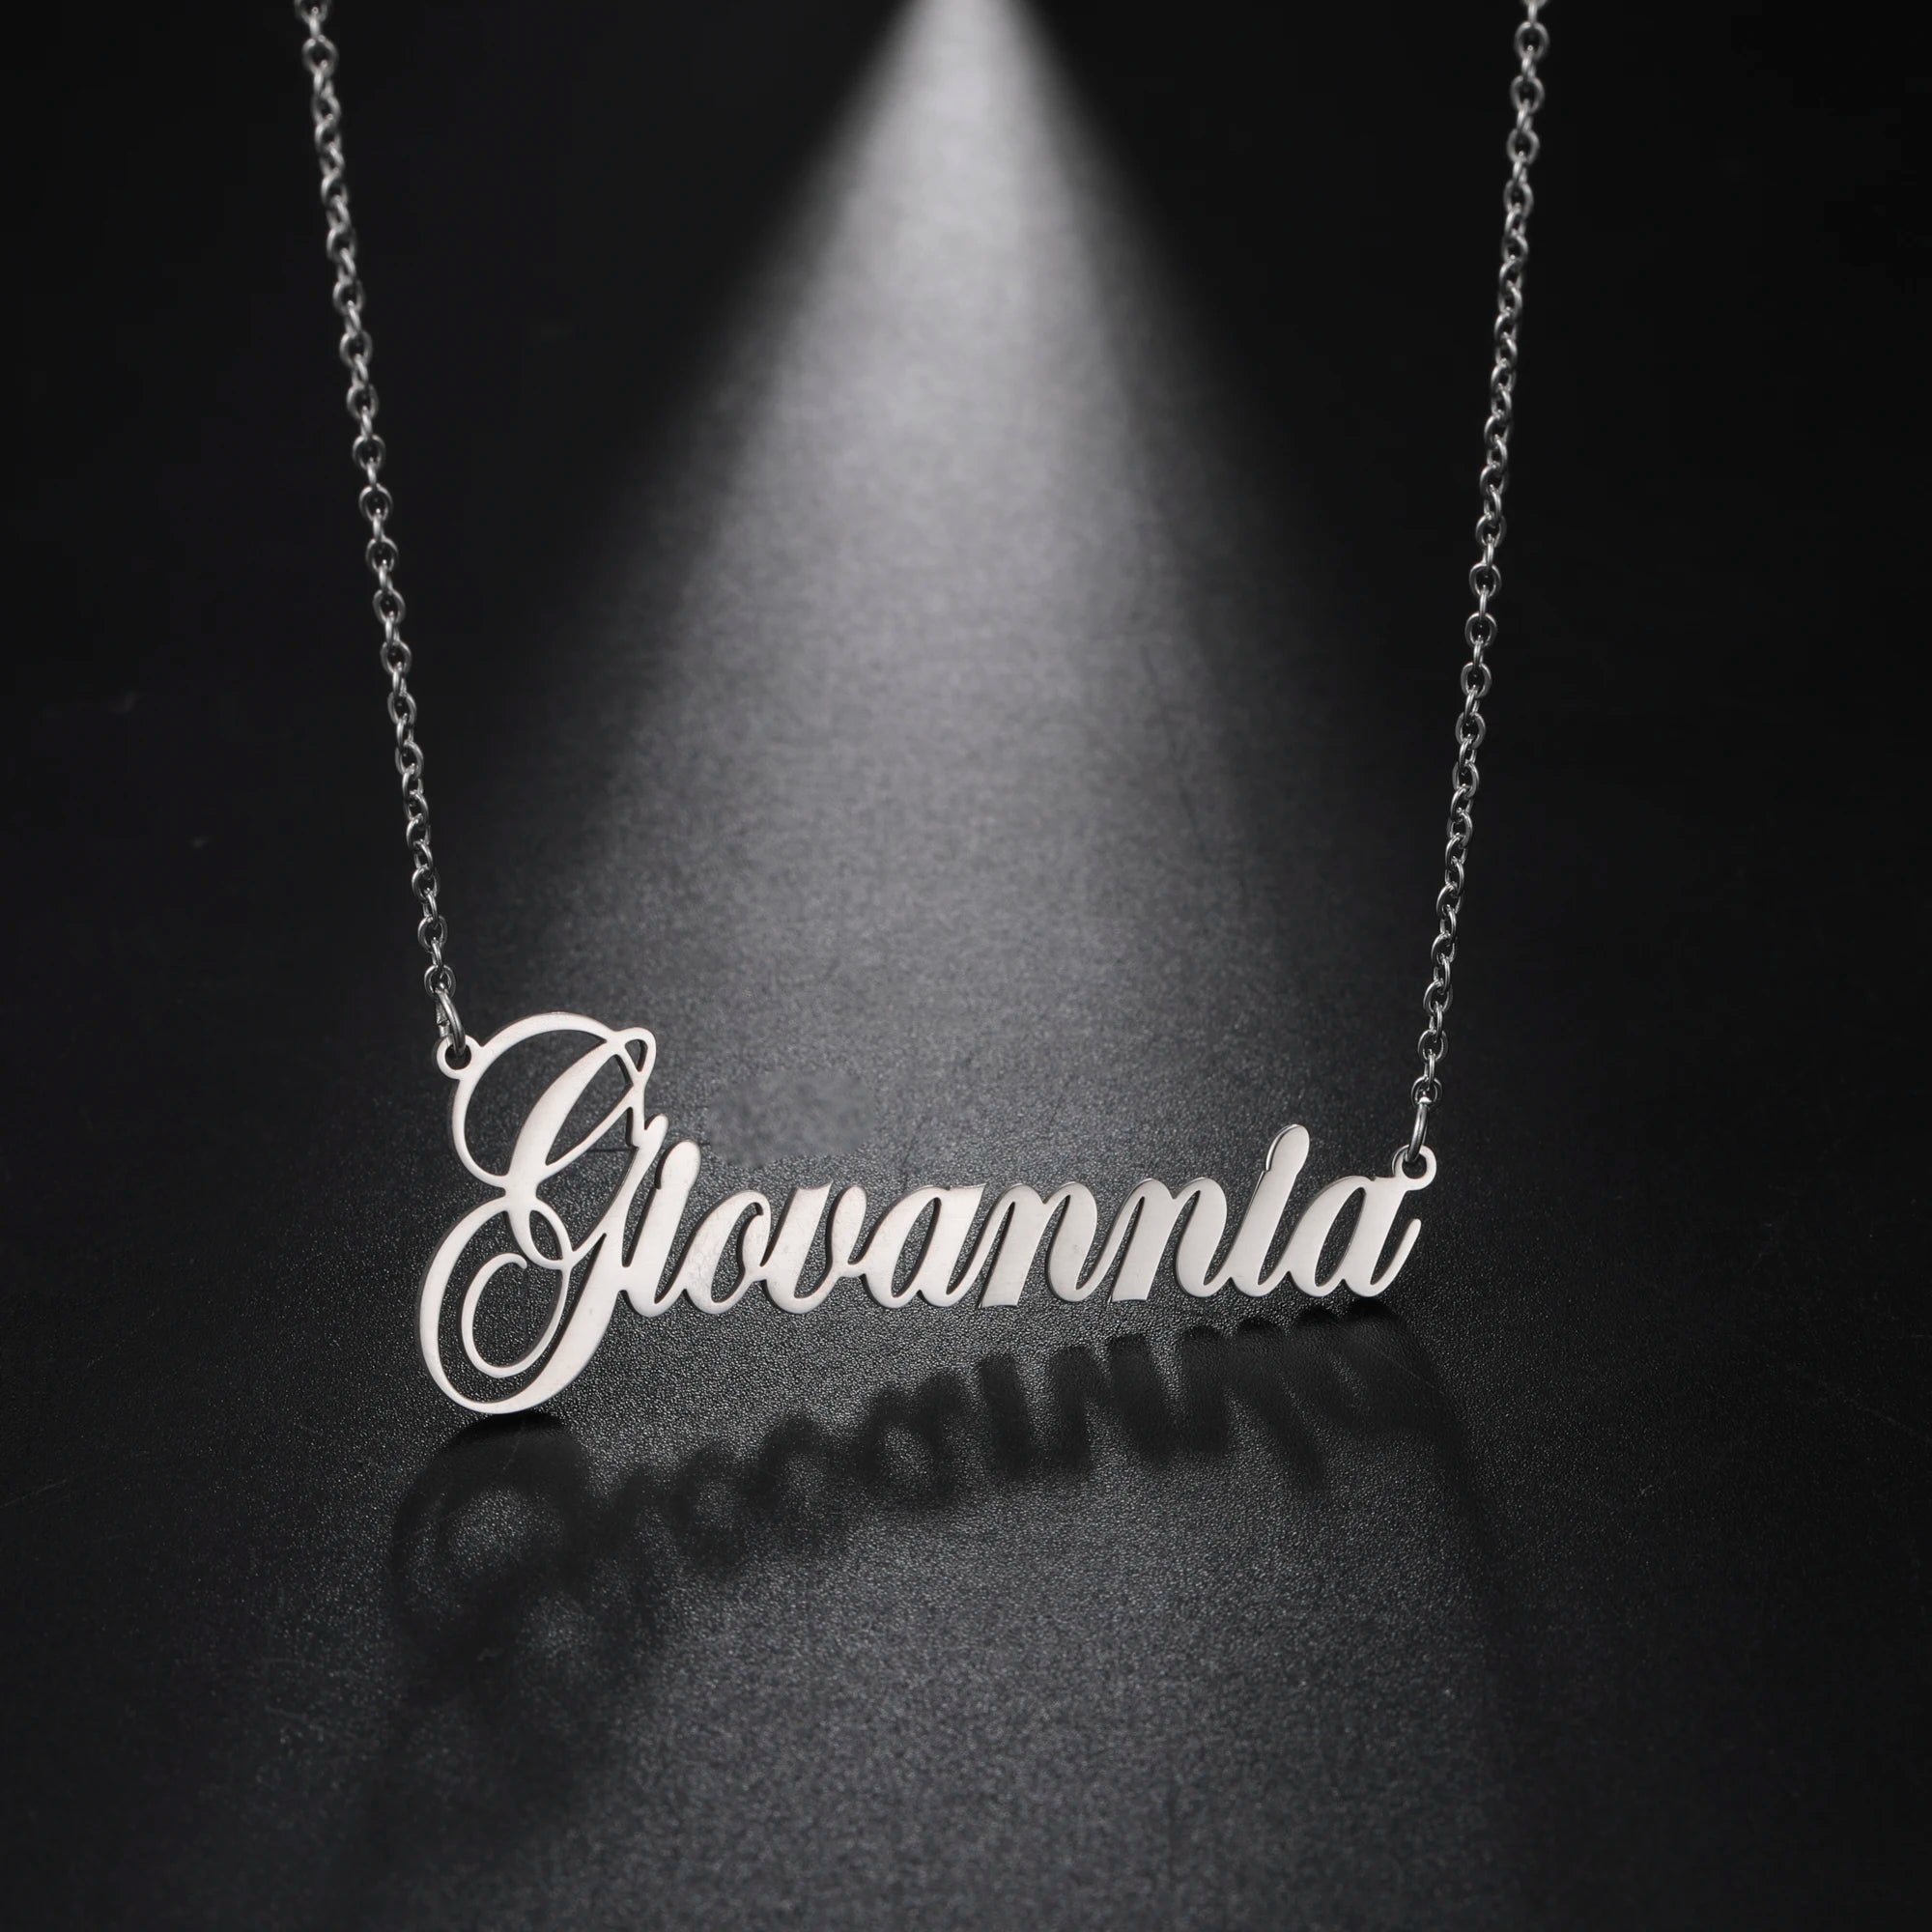 Gold Color - Exquisite Stainless Steel Personalized Name Pendant Necklace